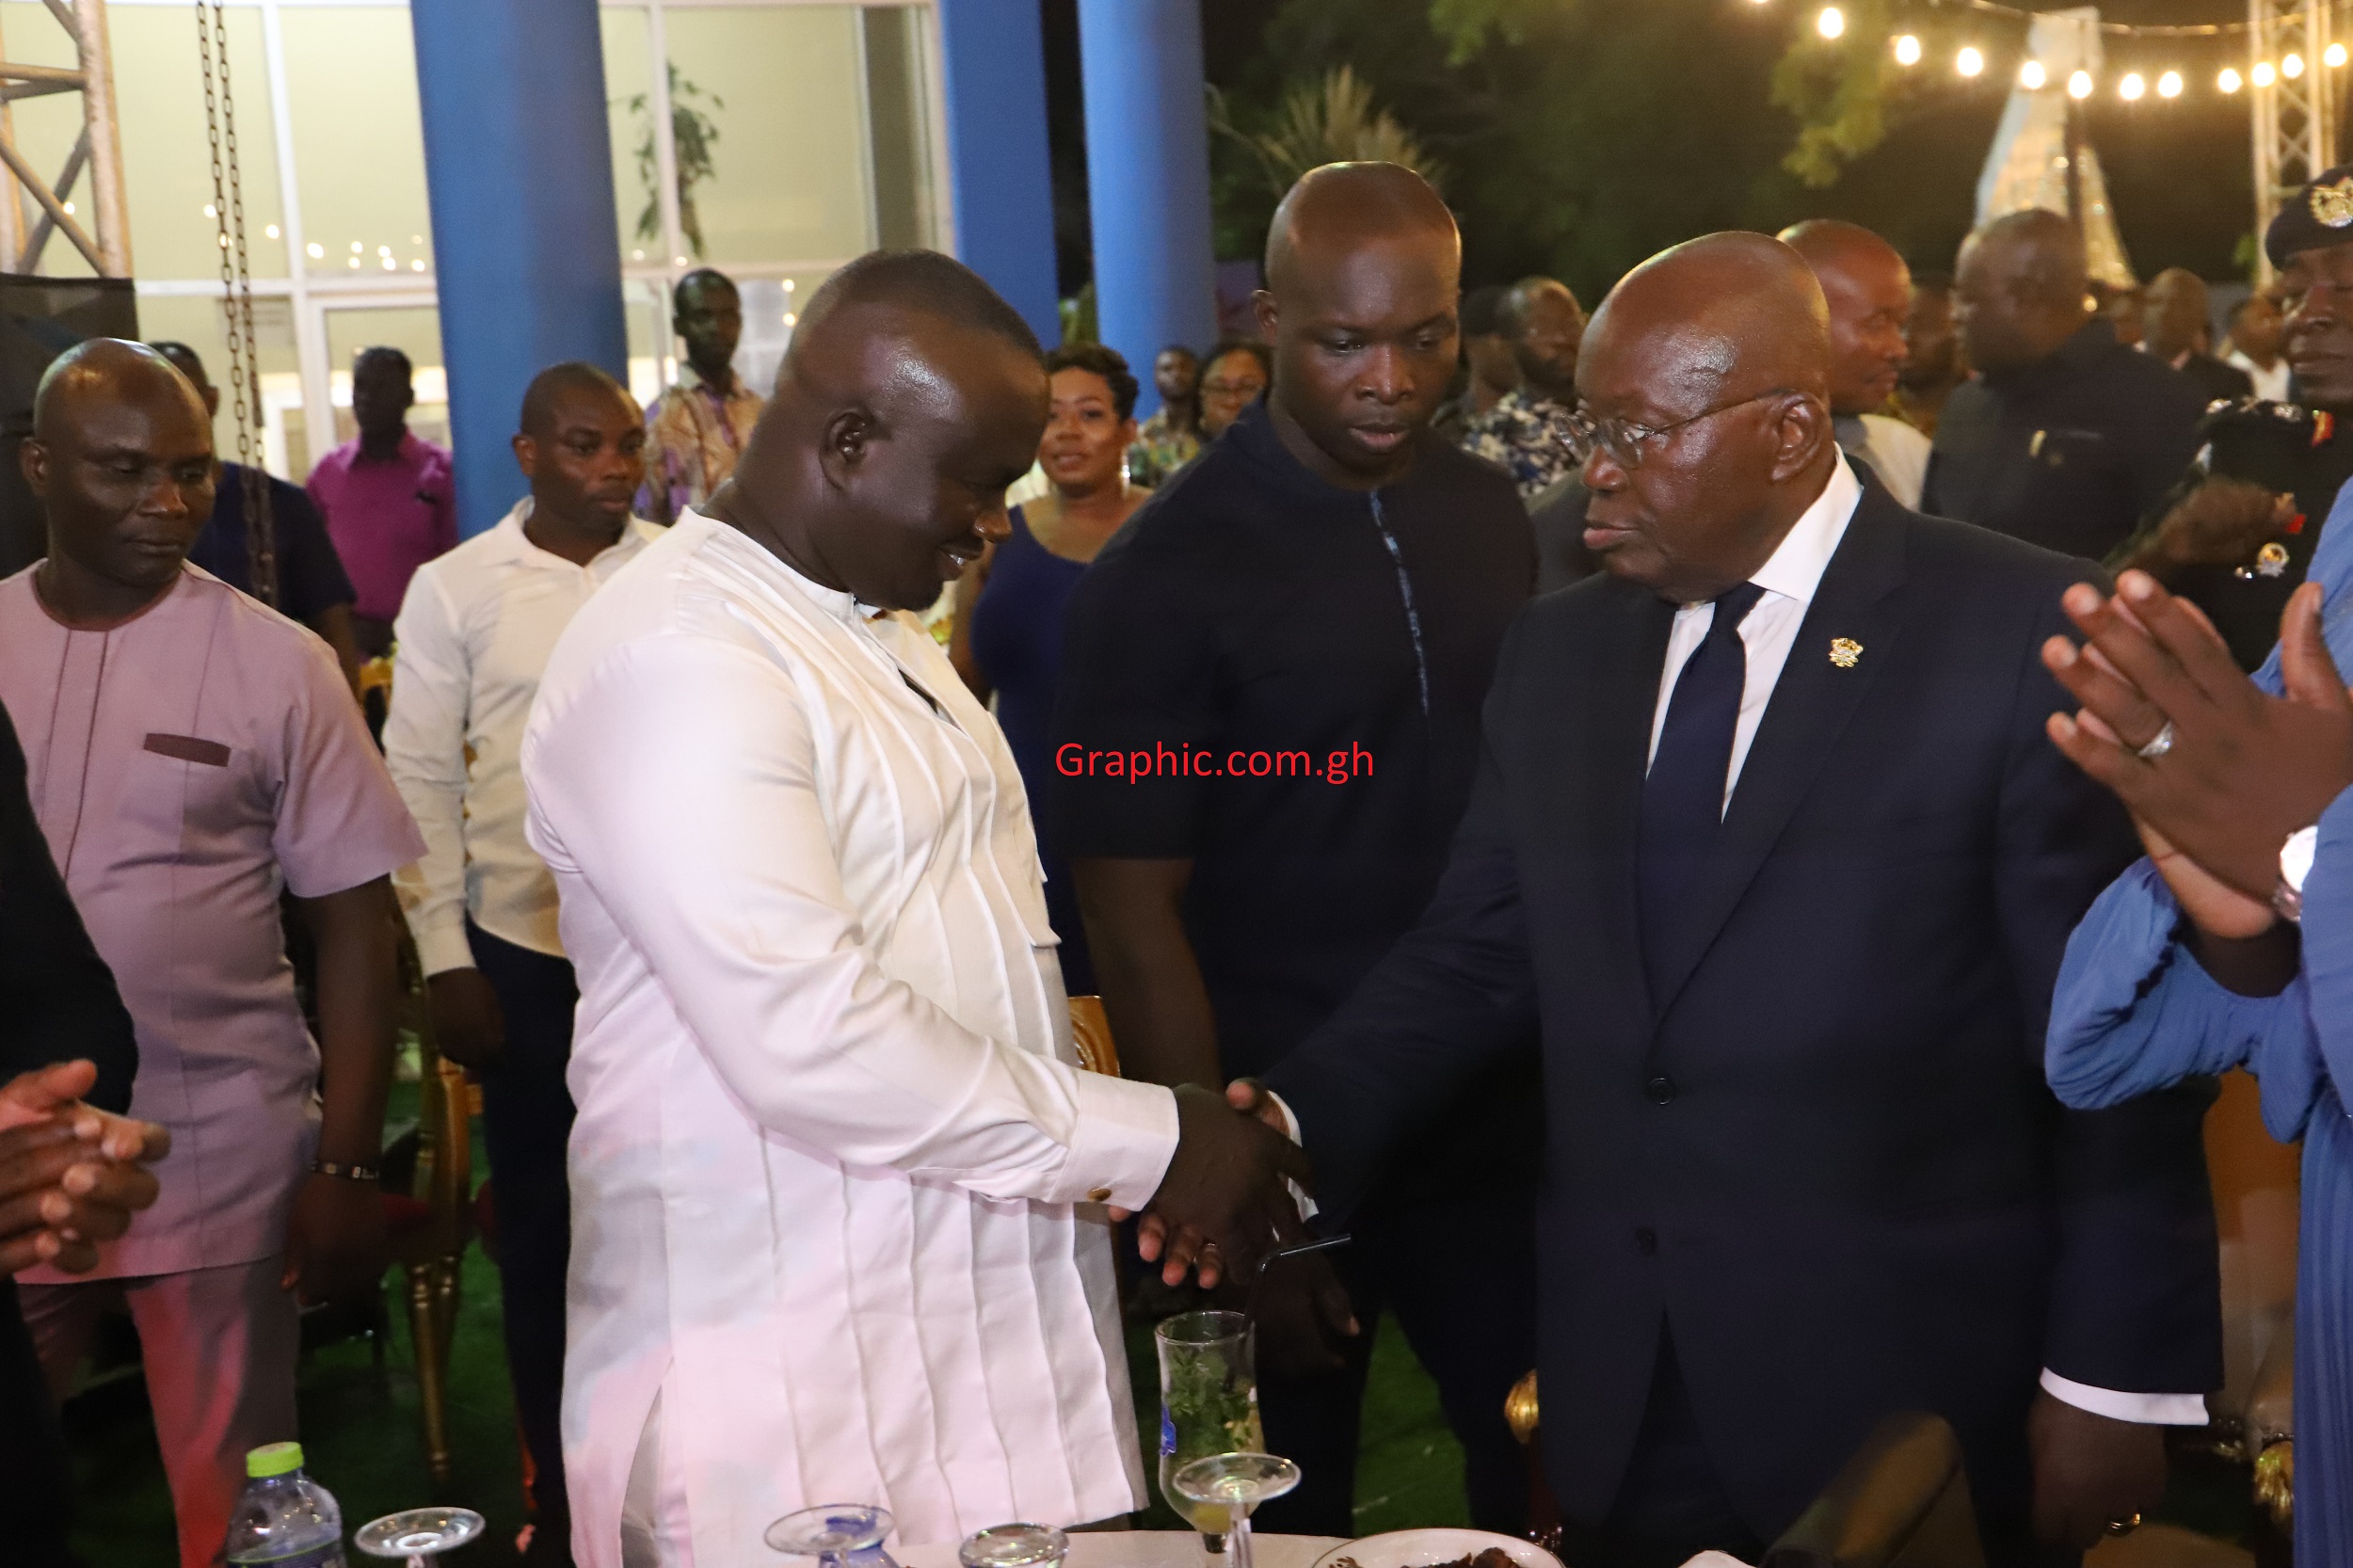 When President Akufo-Addo had dinner with journalists on Wednesday